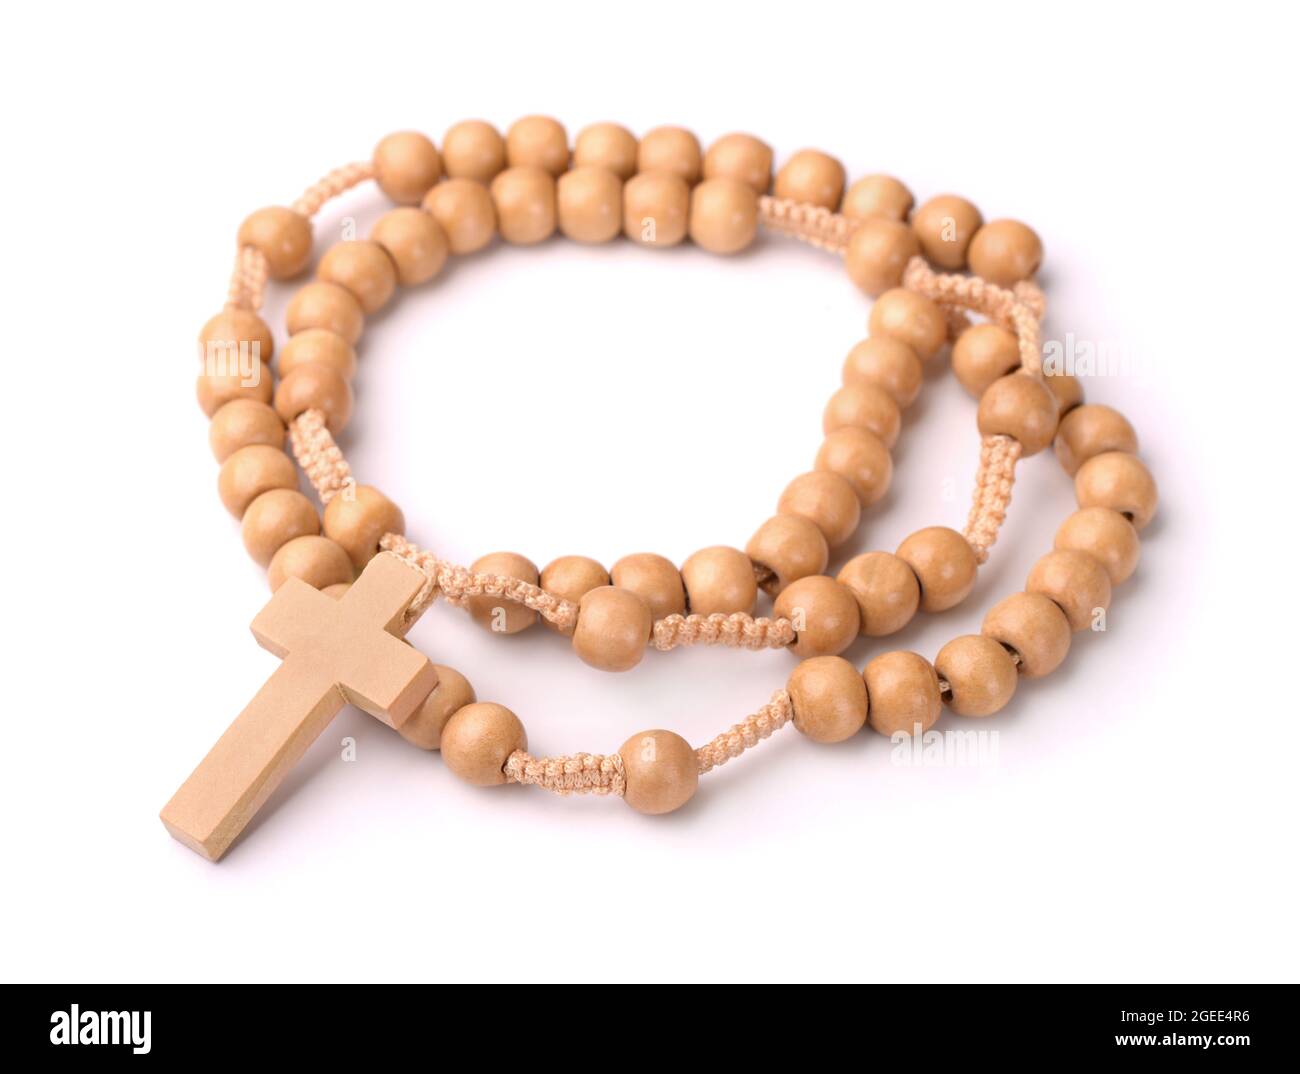 Wooden rosary beads and cross isolated on white Stock Photo